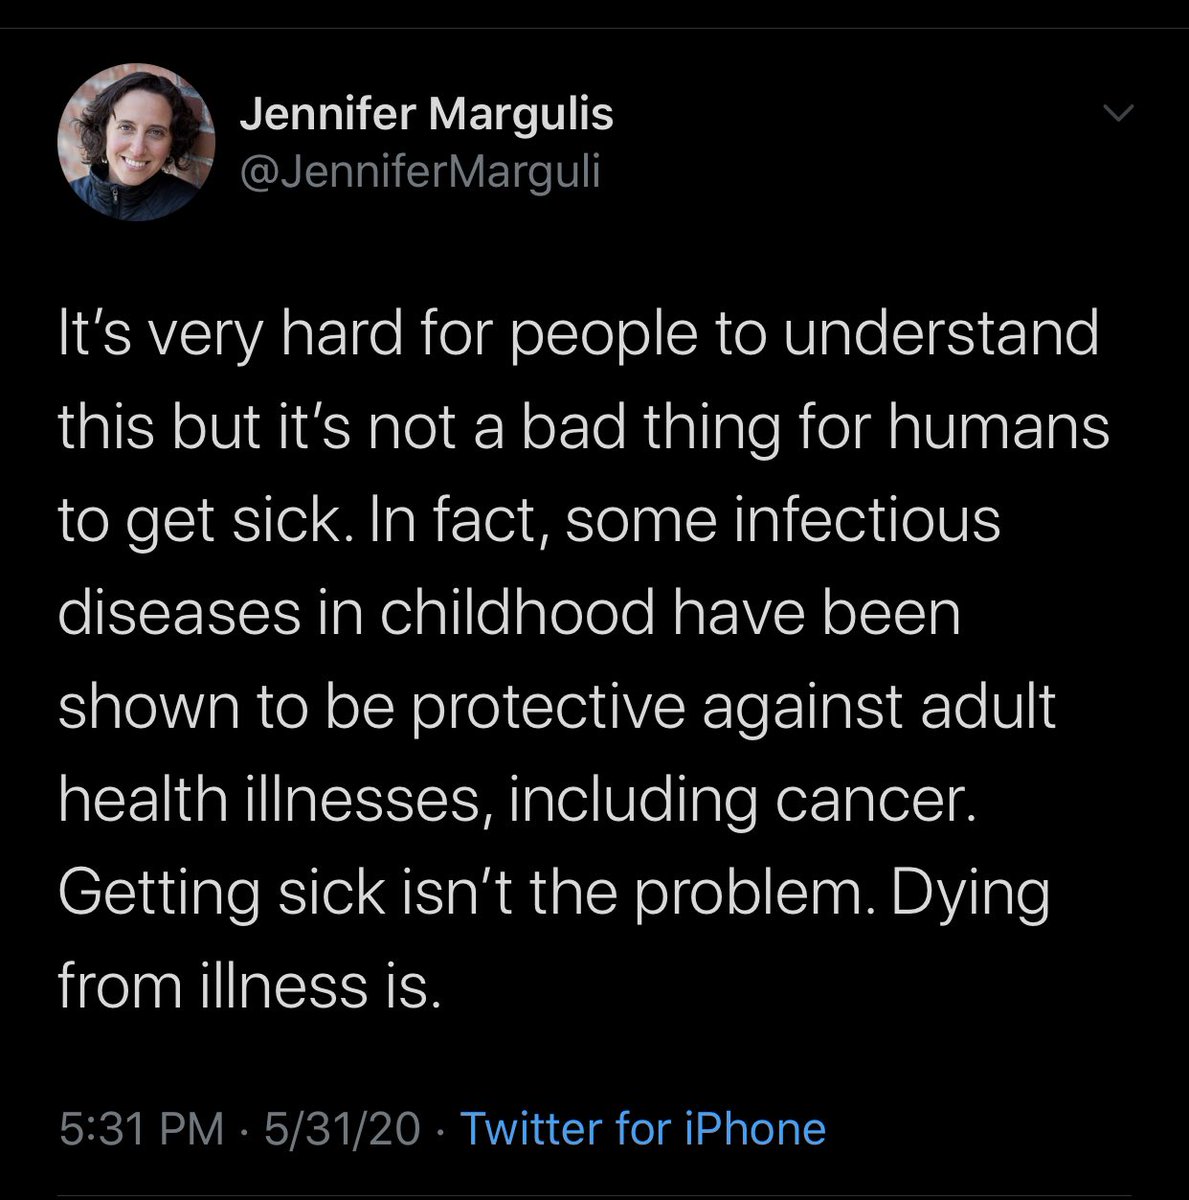 >374K dead so far in 2020 from a new virus we don’t have a vaccine for (>106K in US alone), w/ no sign of stopping. The harms to the millions who didn’t die are incalculable.It’s much better for people not to get sick. Don’t let antivaxxer trolls gaslight w/ their straw men.